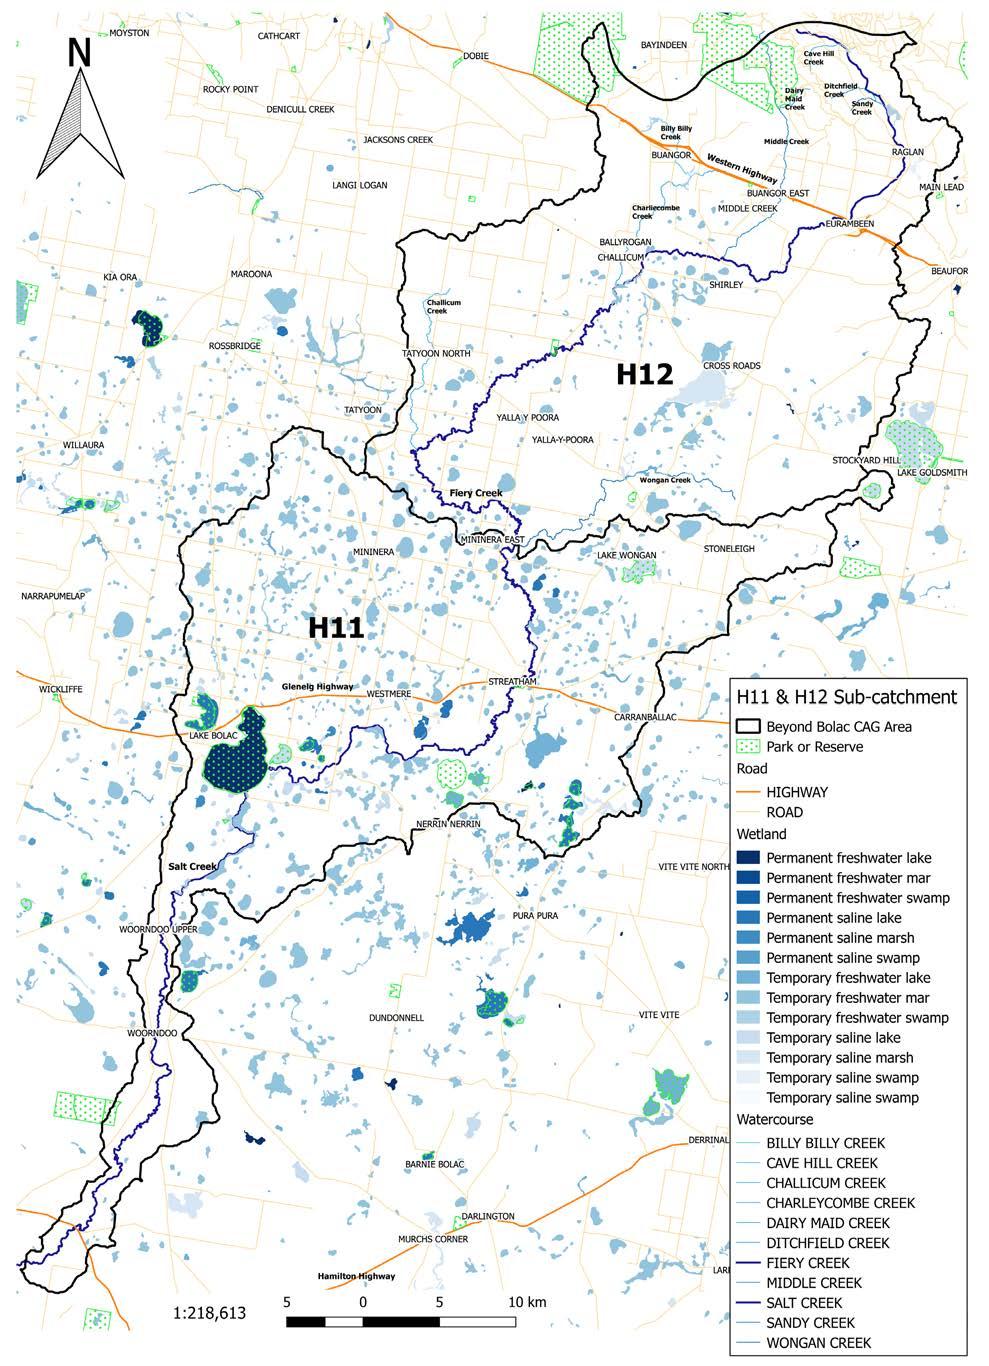 Biodiversity Maps The Biodiversity maps provided within the document will assist Beyond Bolac CAG make strategic decisions for the H11 H12 sub-catchment.